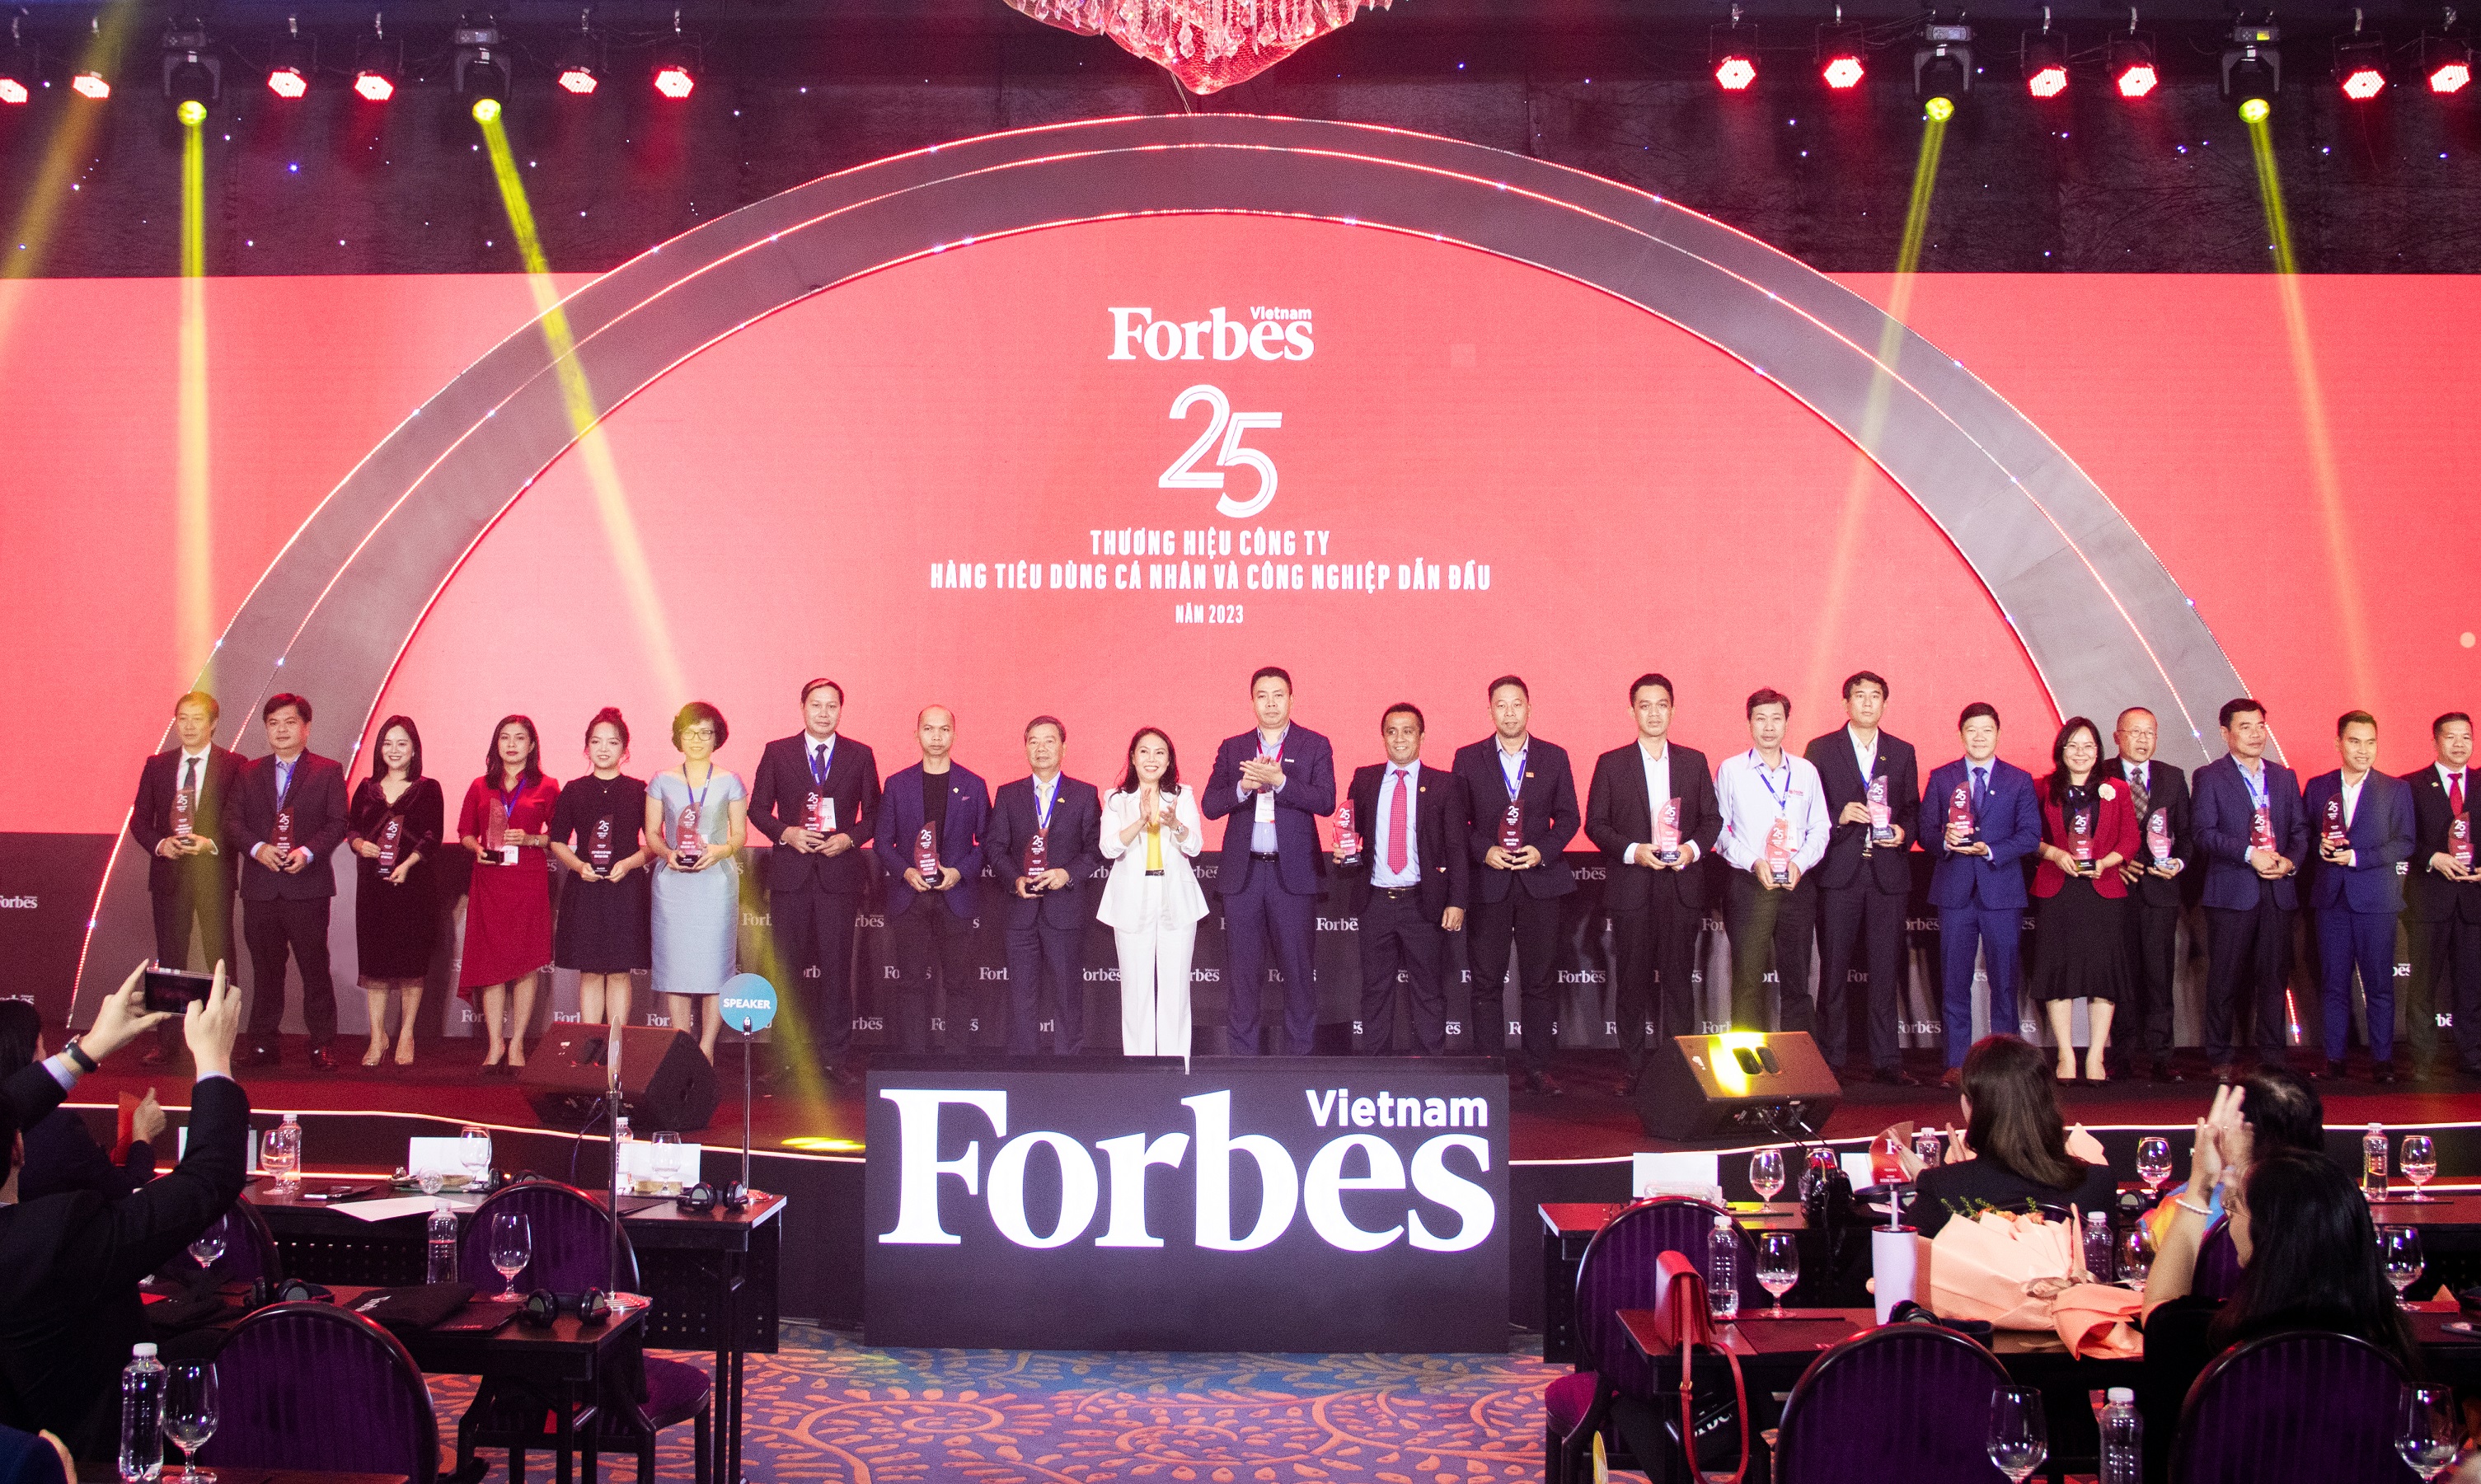 Viglacera is recognized as one of the top 25 leading brands by Forbes Vietnam.